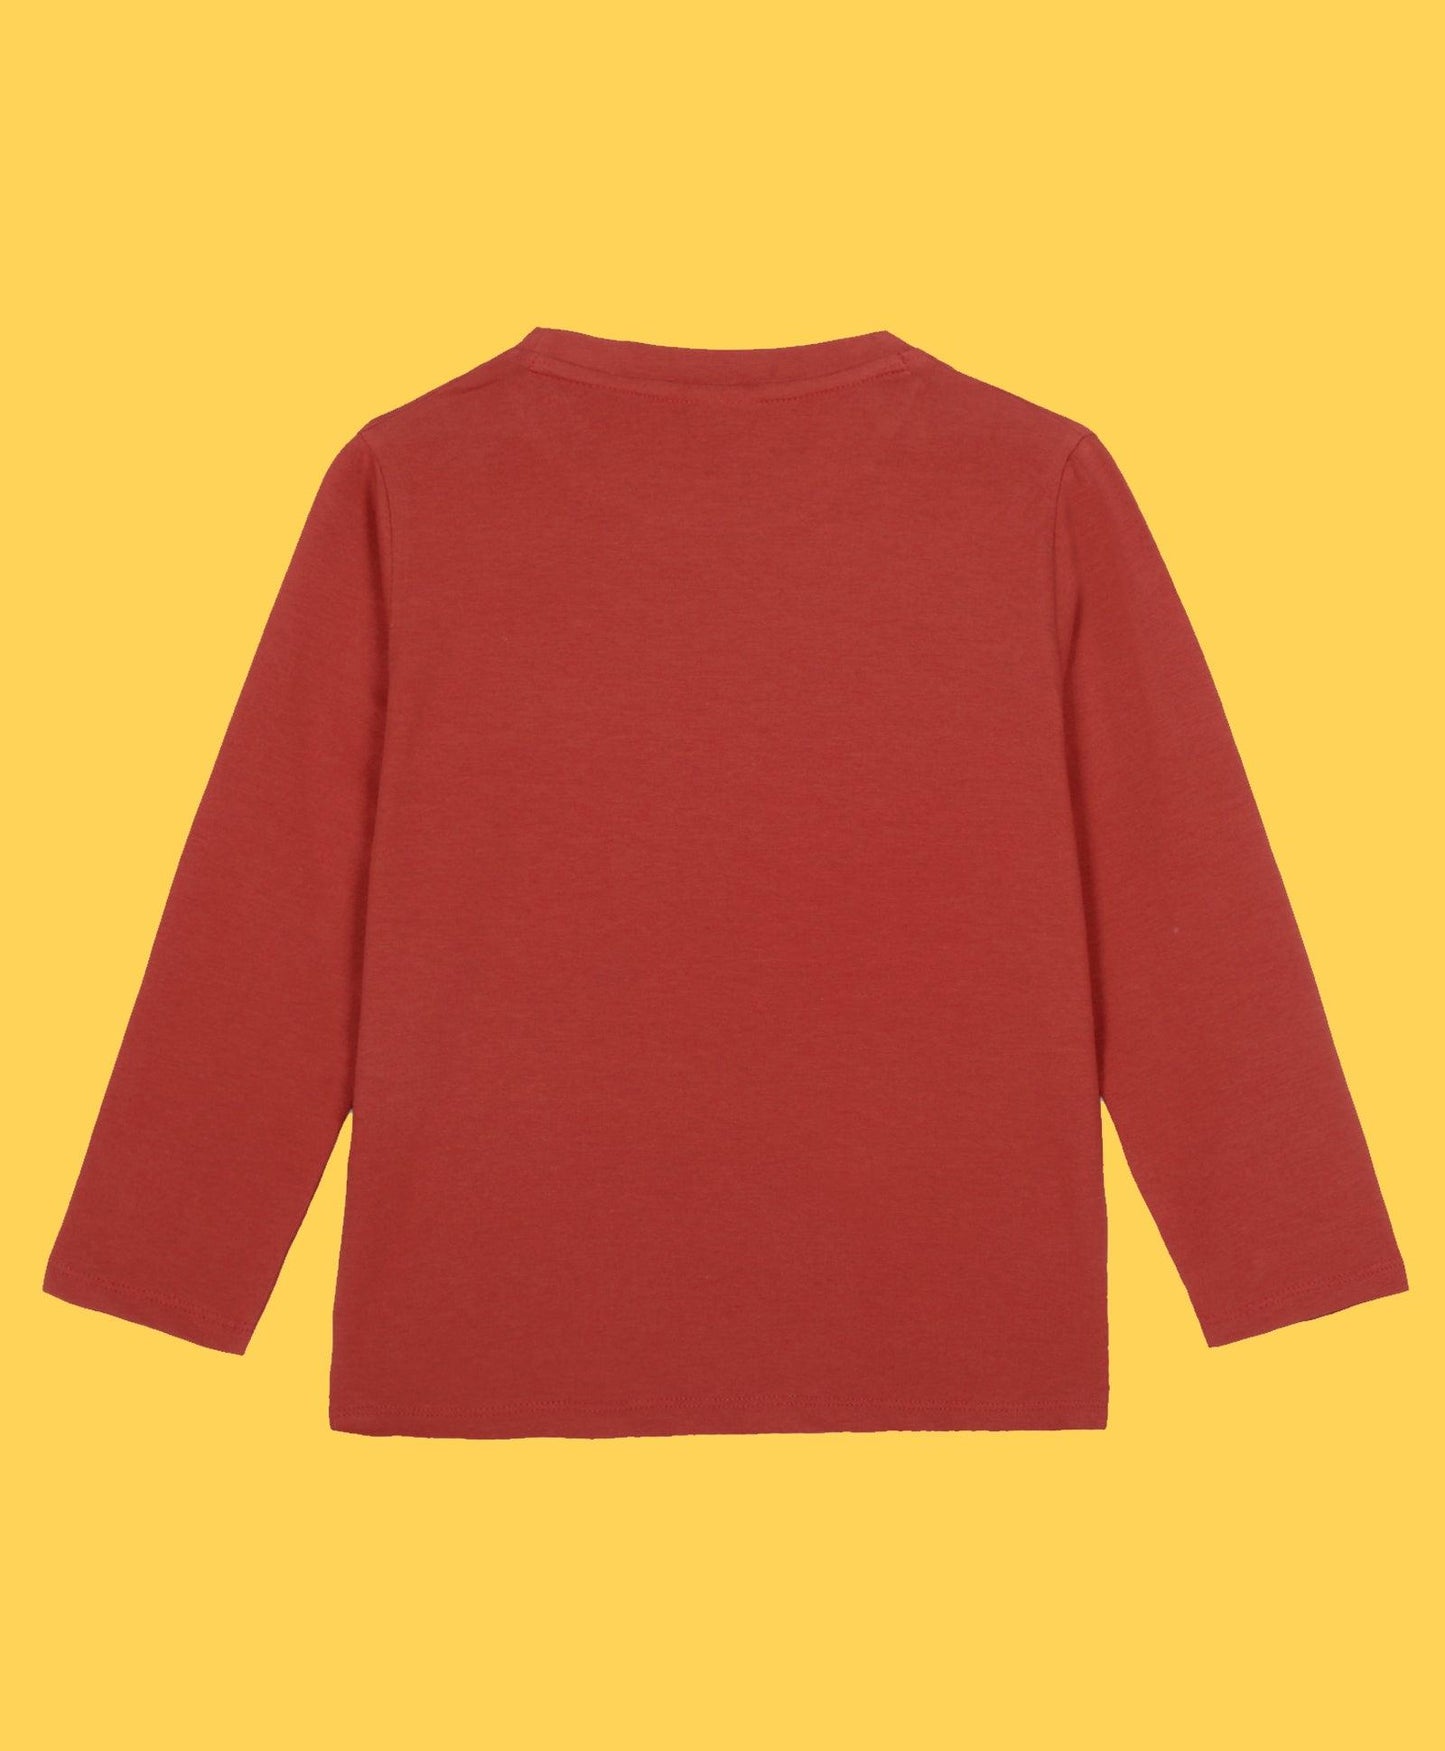 NEWYORK RED LONG SLEEVES T-SHIRT - RED - Anthrilo 